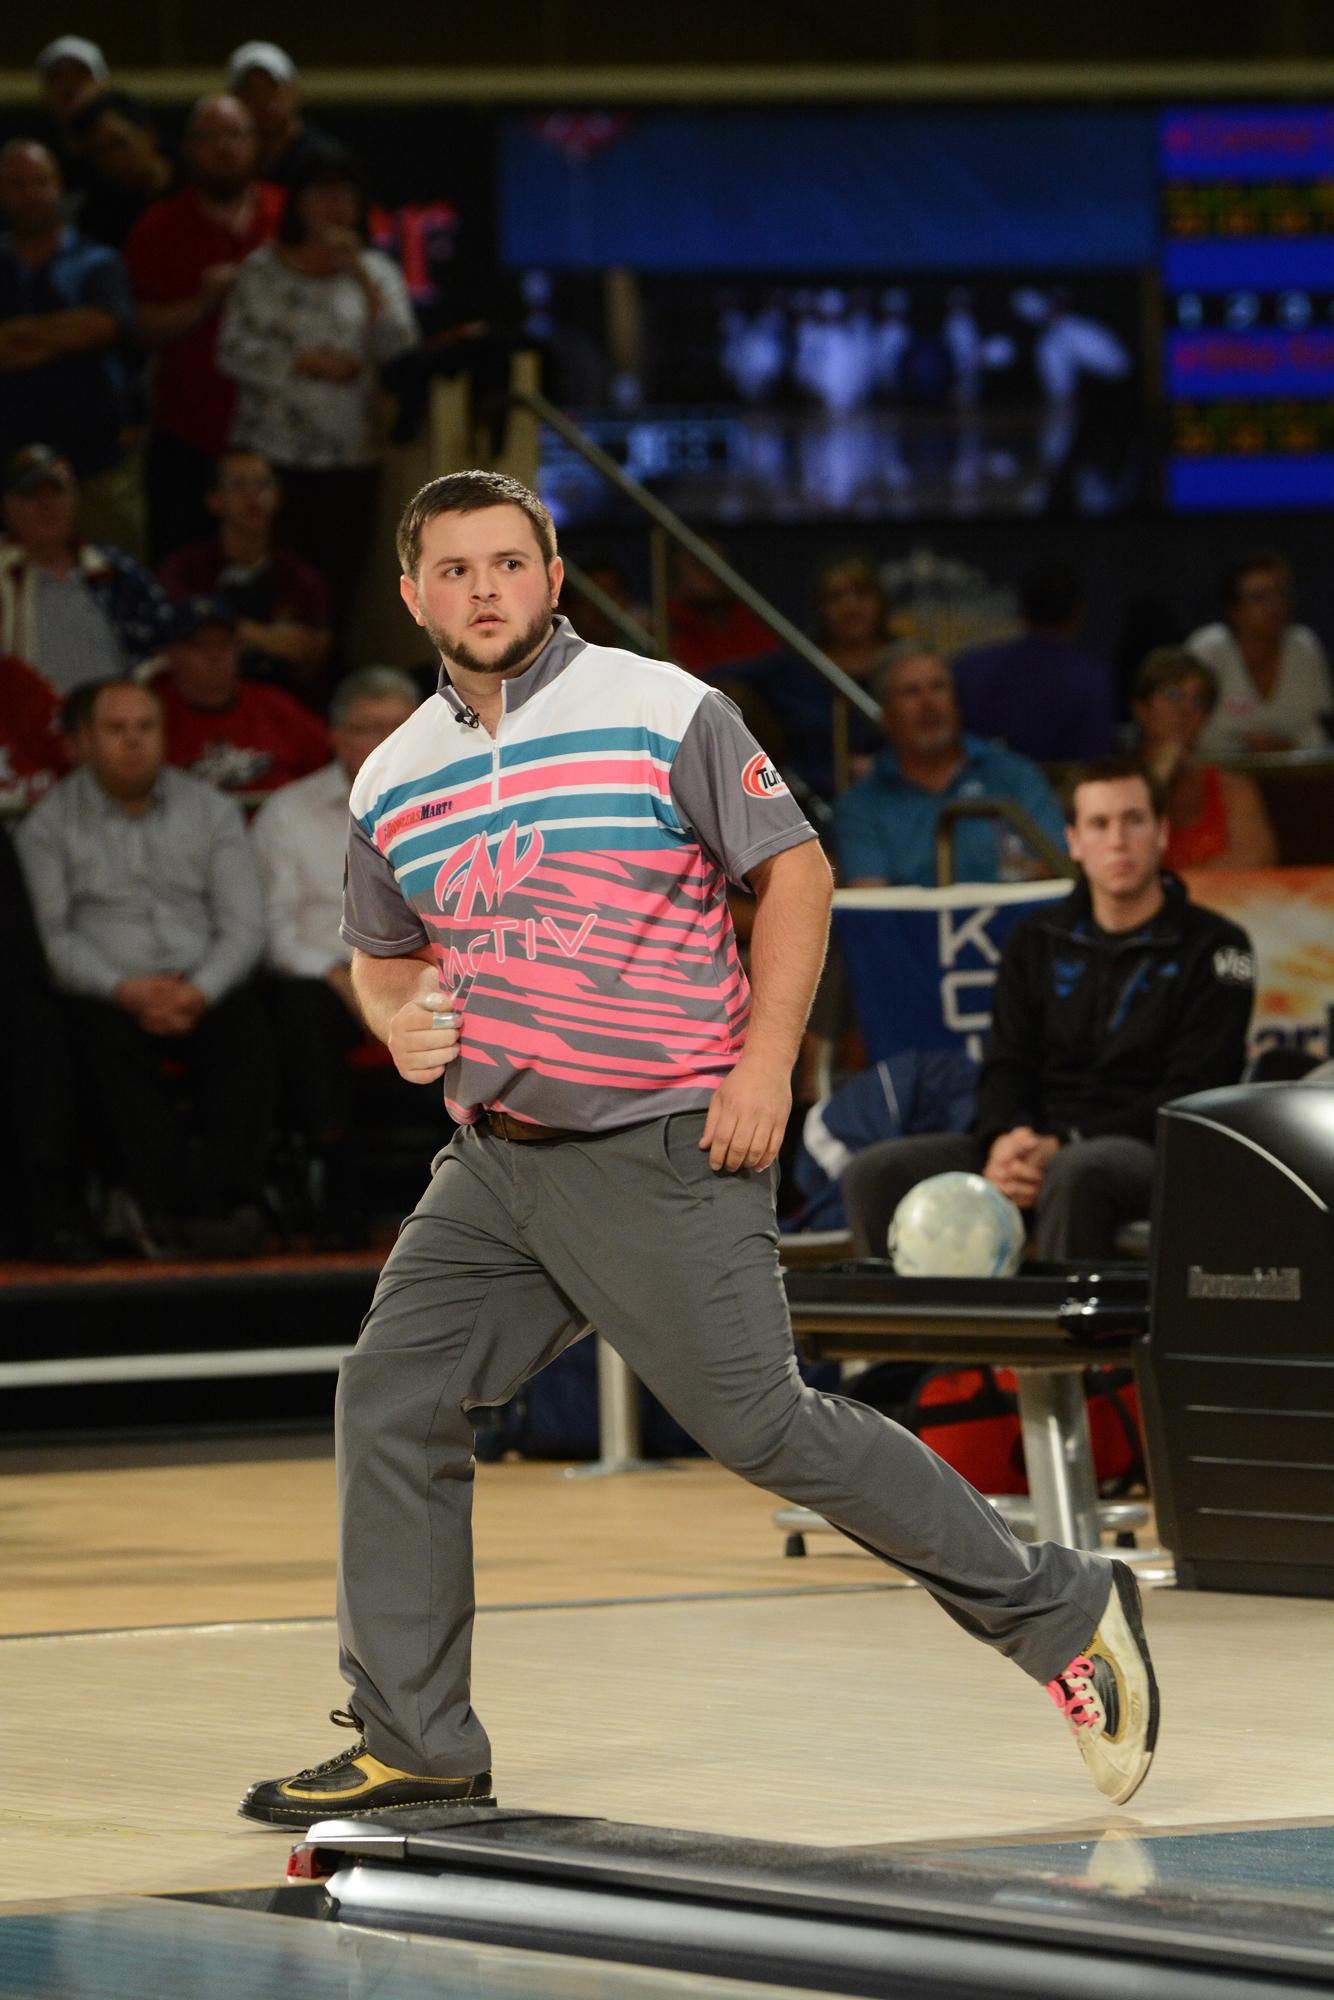 BOWL Pickford, Simonsen Retain Lead After First Match Play Round in Roth/Holman PBA Doubles Championship